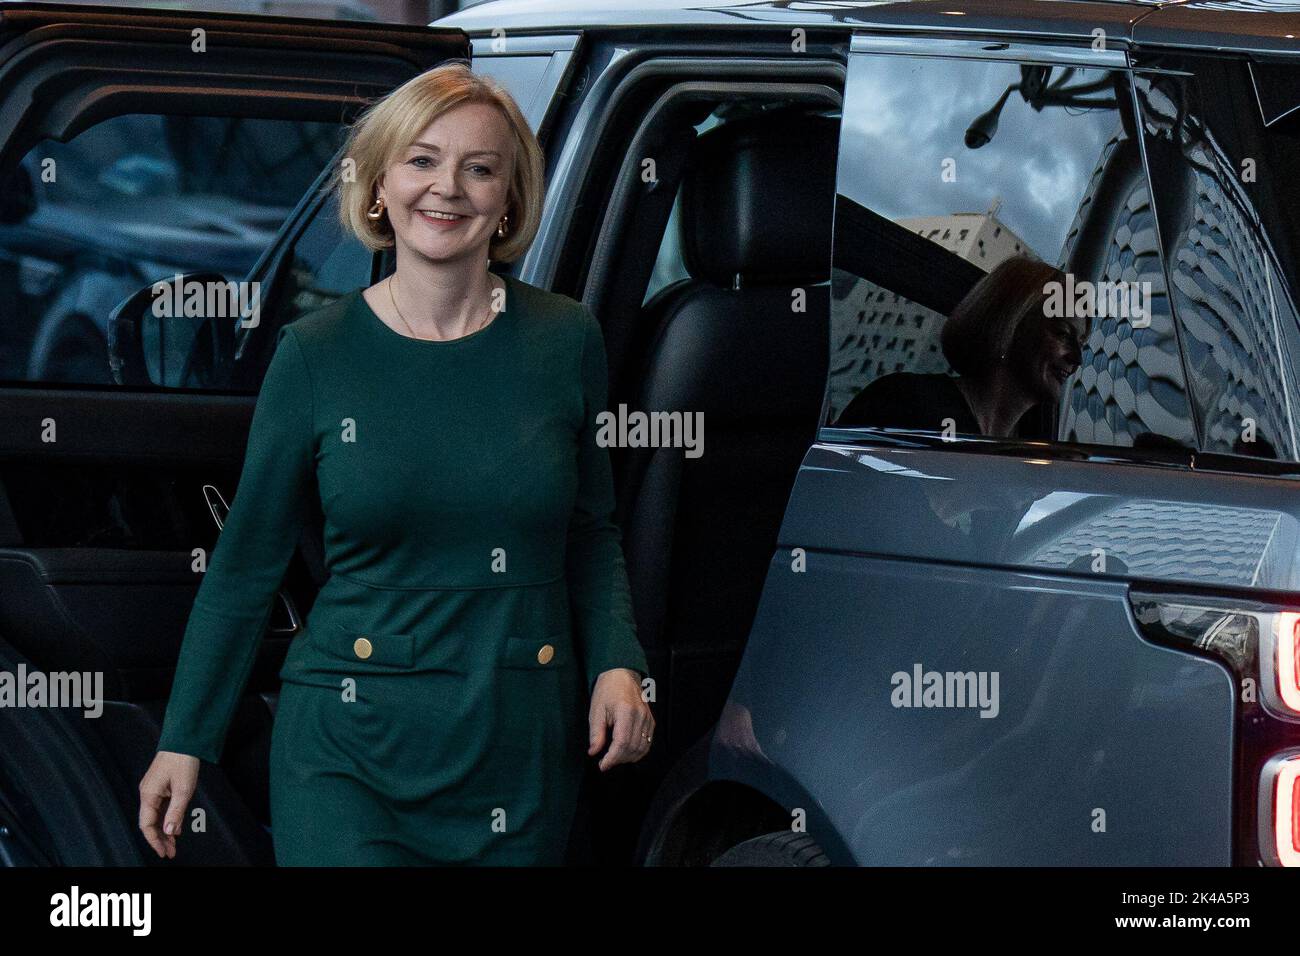 Prime Minister Liz Truss arrives at the Hyatt hotel in Birmingham ahead of the Conservative Party annual conference at the International Convention Centre. Picture date: Saturday October 1, 2022. Stock Photo